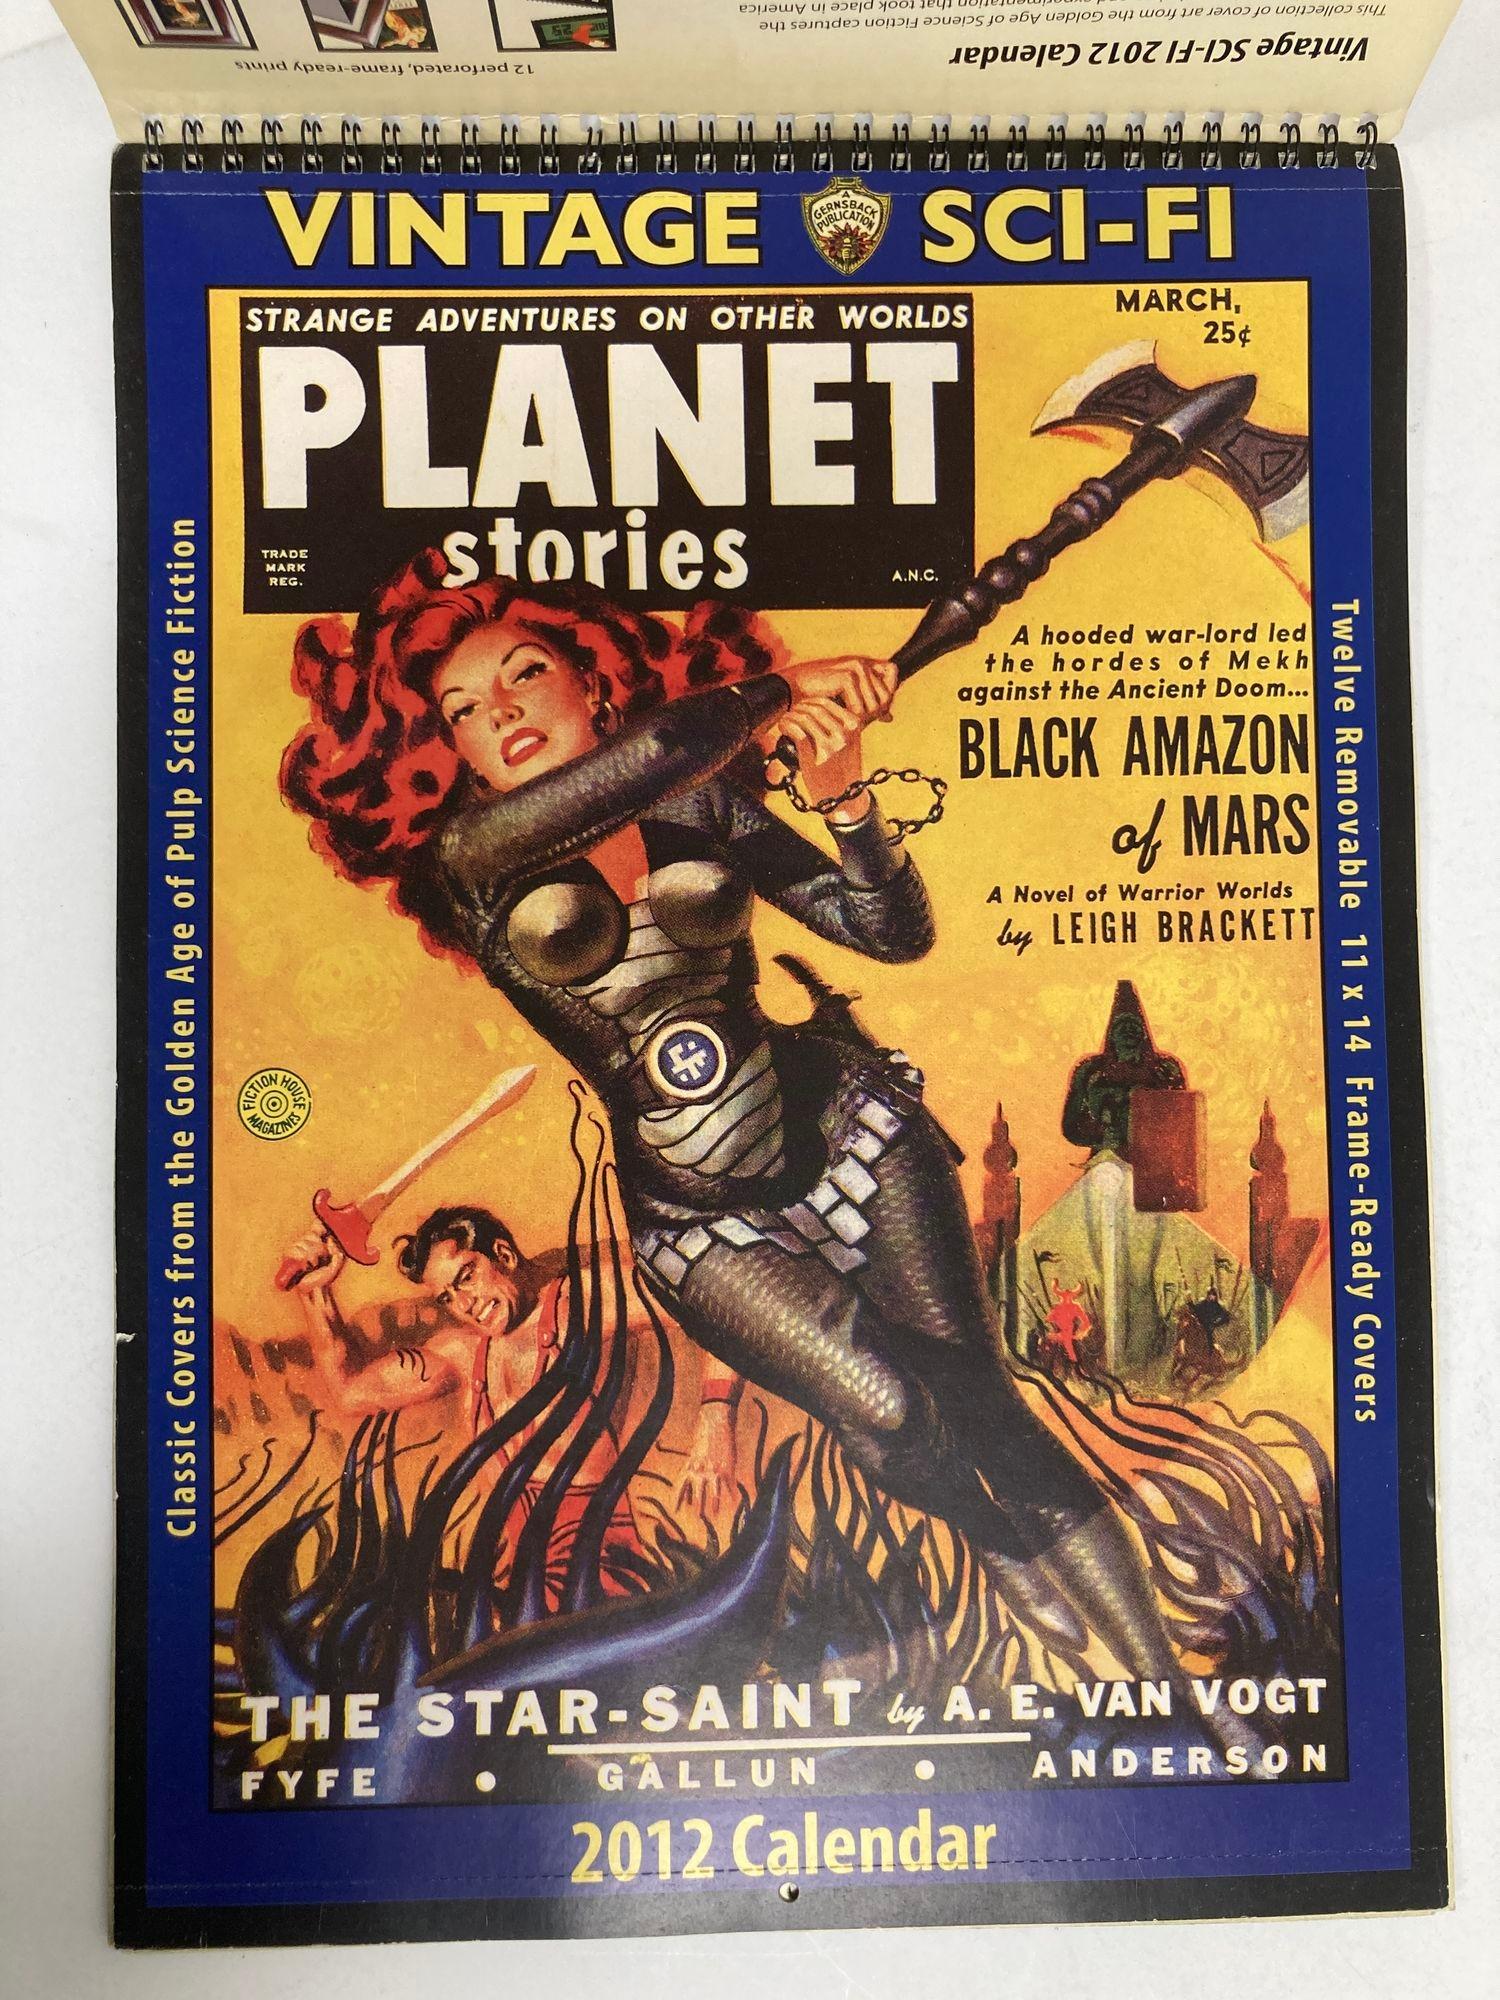 Wonder Stories Calendar 1930s Covers by Gernsback-Frank R Paul Collectible For Sale 5